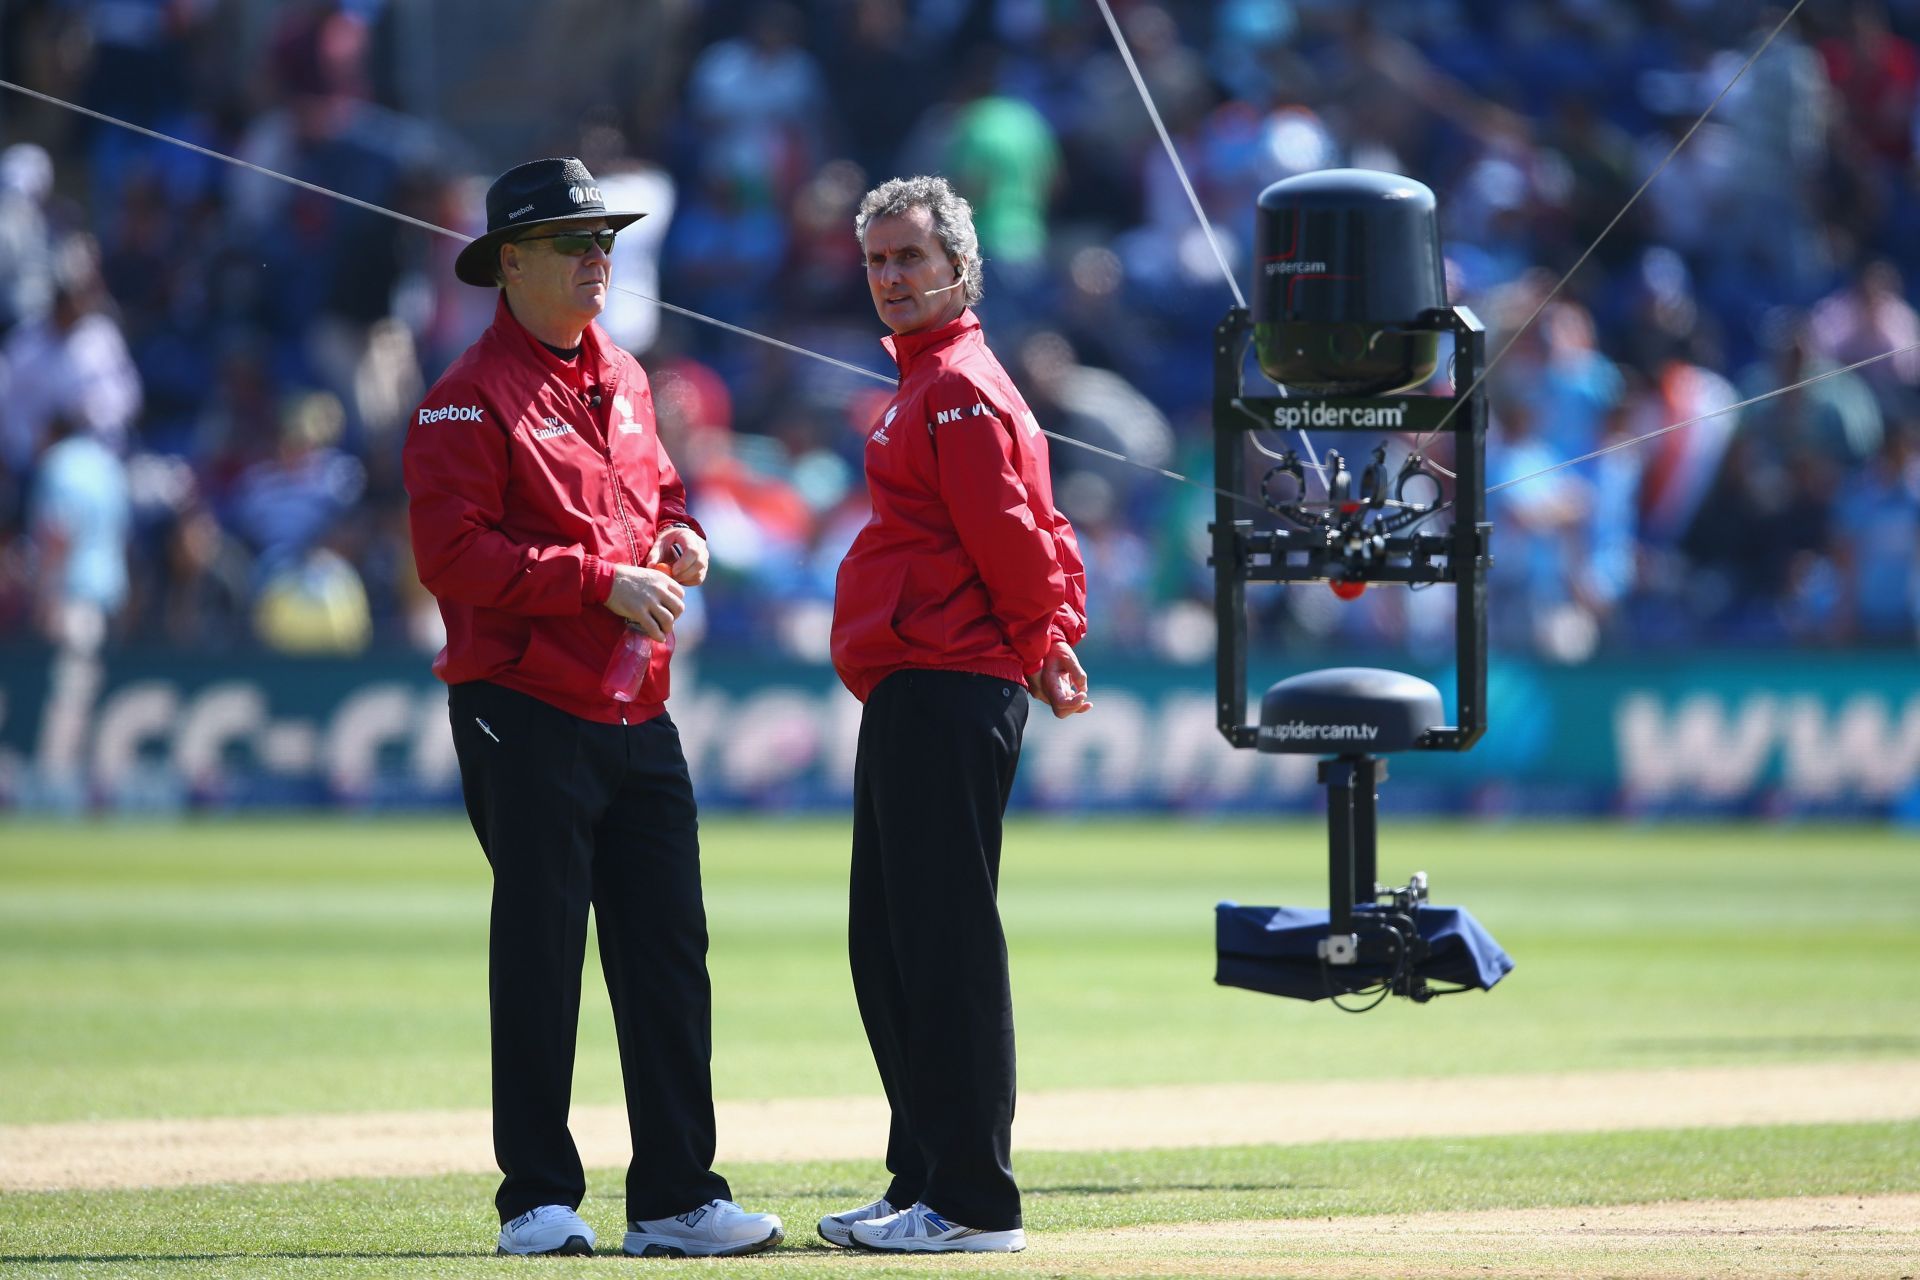 The spider-cam has become a part of the game. Pic: Getty Images